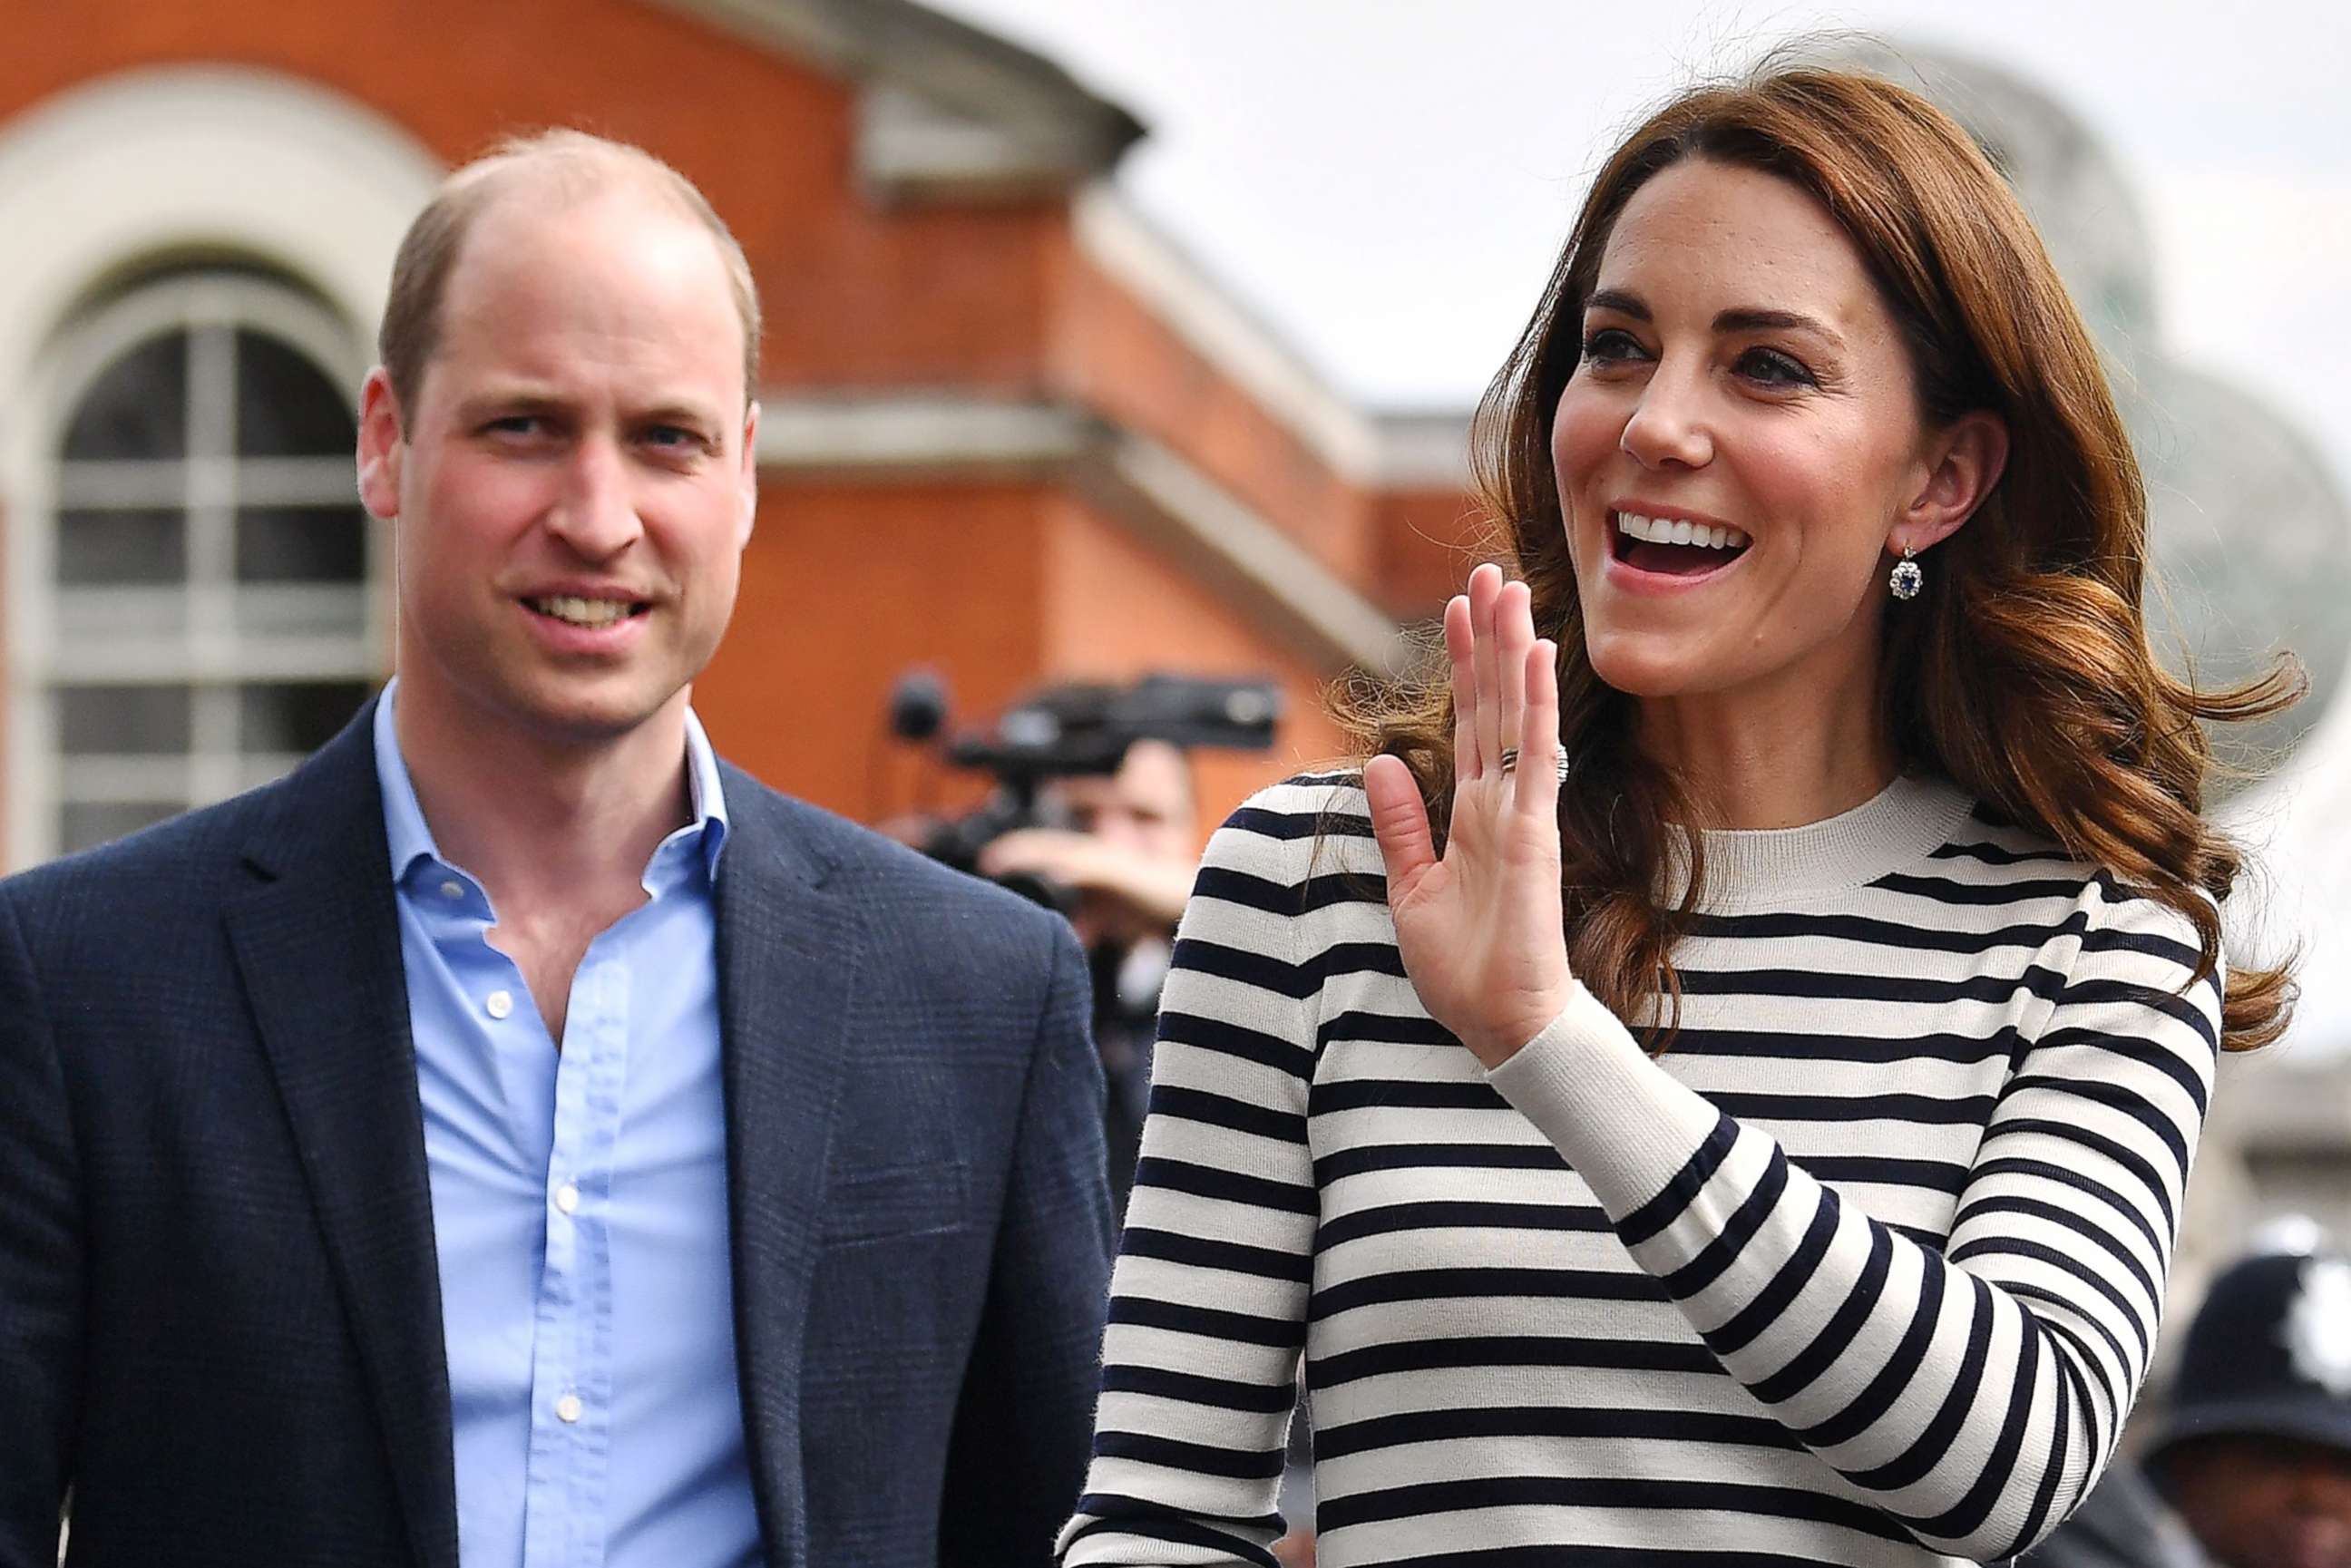 PHOTO:Britain's Prince William, Duke of Cambridge and Britain's Catherine, Duchess of Cambridge wave as they leave after attending the launch of the King's Cup Regatta, at the Cutty Sark in Greenwich, south east London, May 7, 2019.